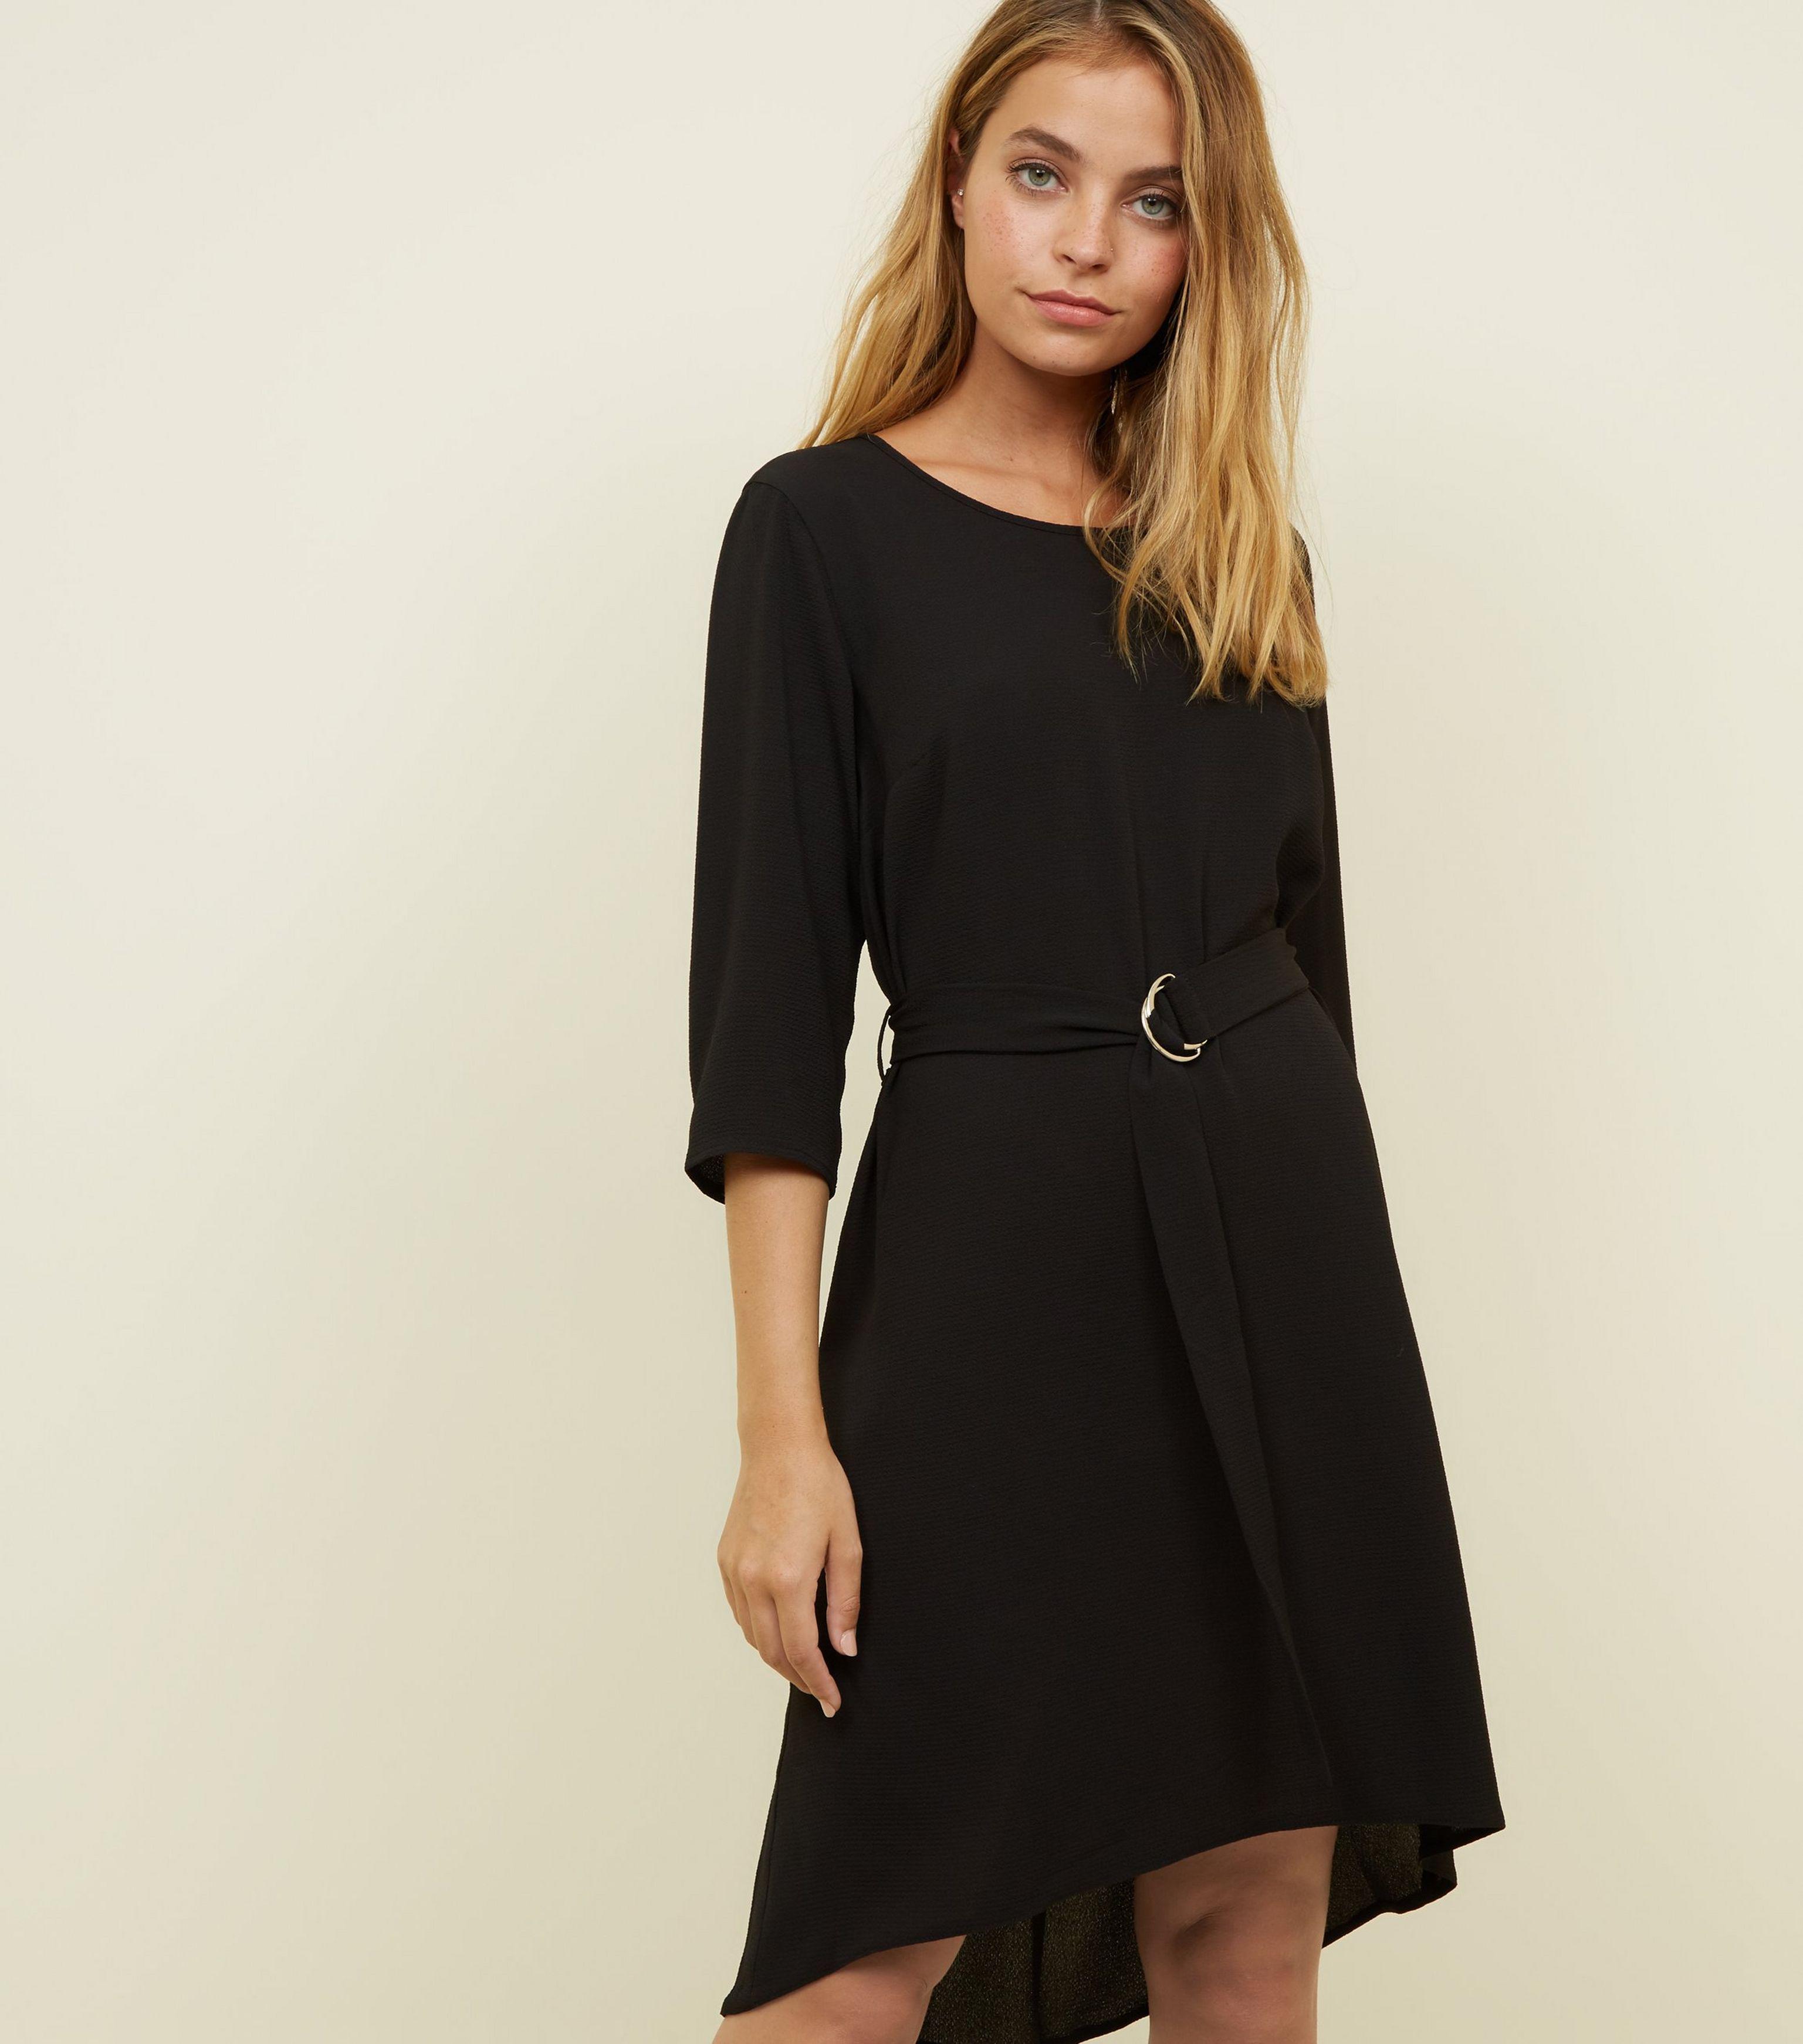 New Look Petite Party Dresses Online Shop, UP TO 62% OFF |  www.campingportdelaselva.com